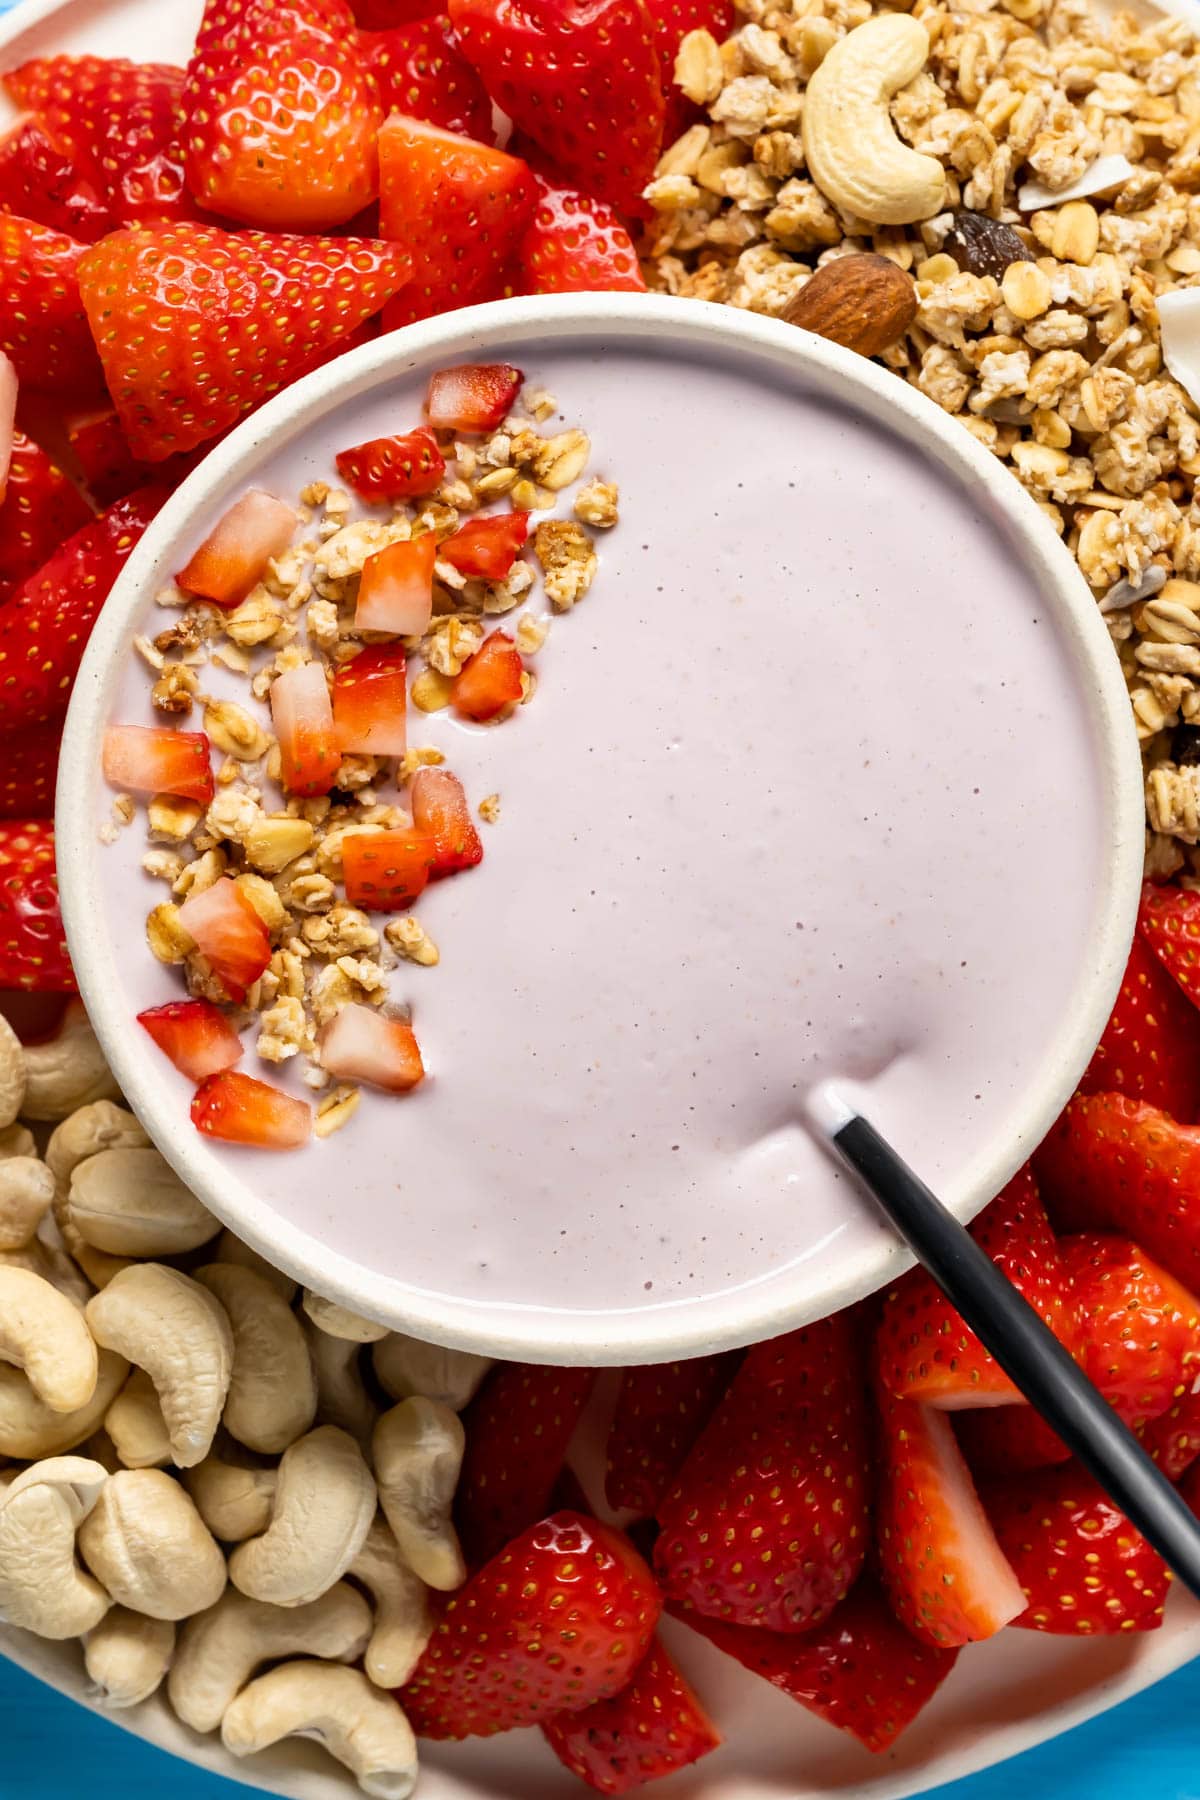 Vegan yogurt in a bowl topped with granola and sliced strawberries.